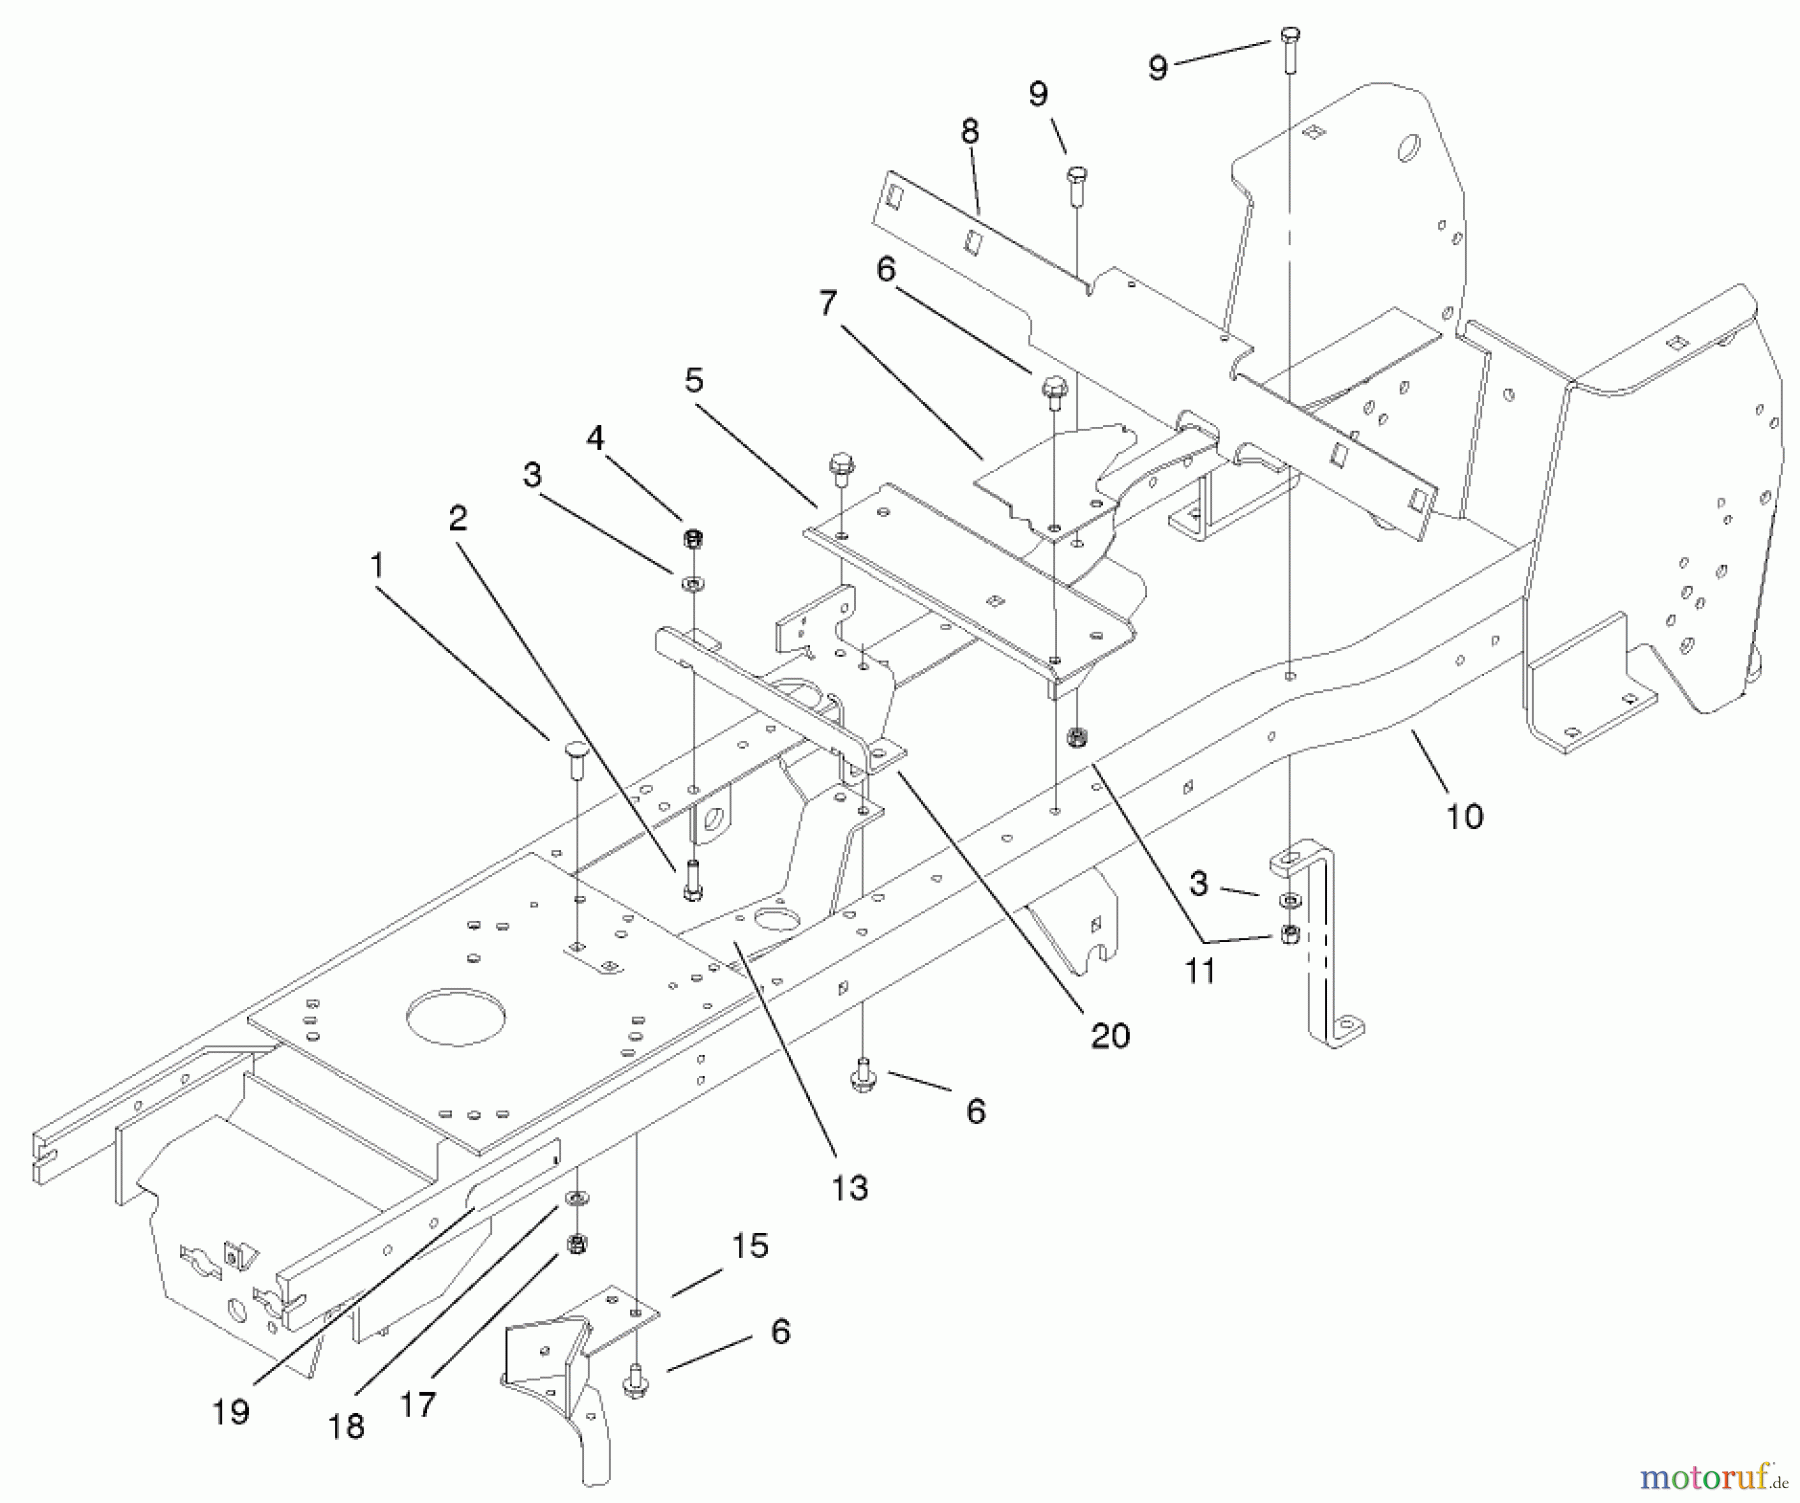  Toro Neu Mowers, Lawn & Garden Tractor Seite 1 72051 (265-H) - Toro 265-H Lawn and Garden Tractor, 2001 (210000001-210999999) FRAME ASSEMBLY